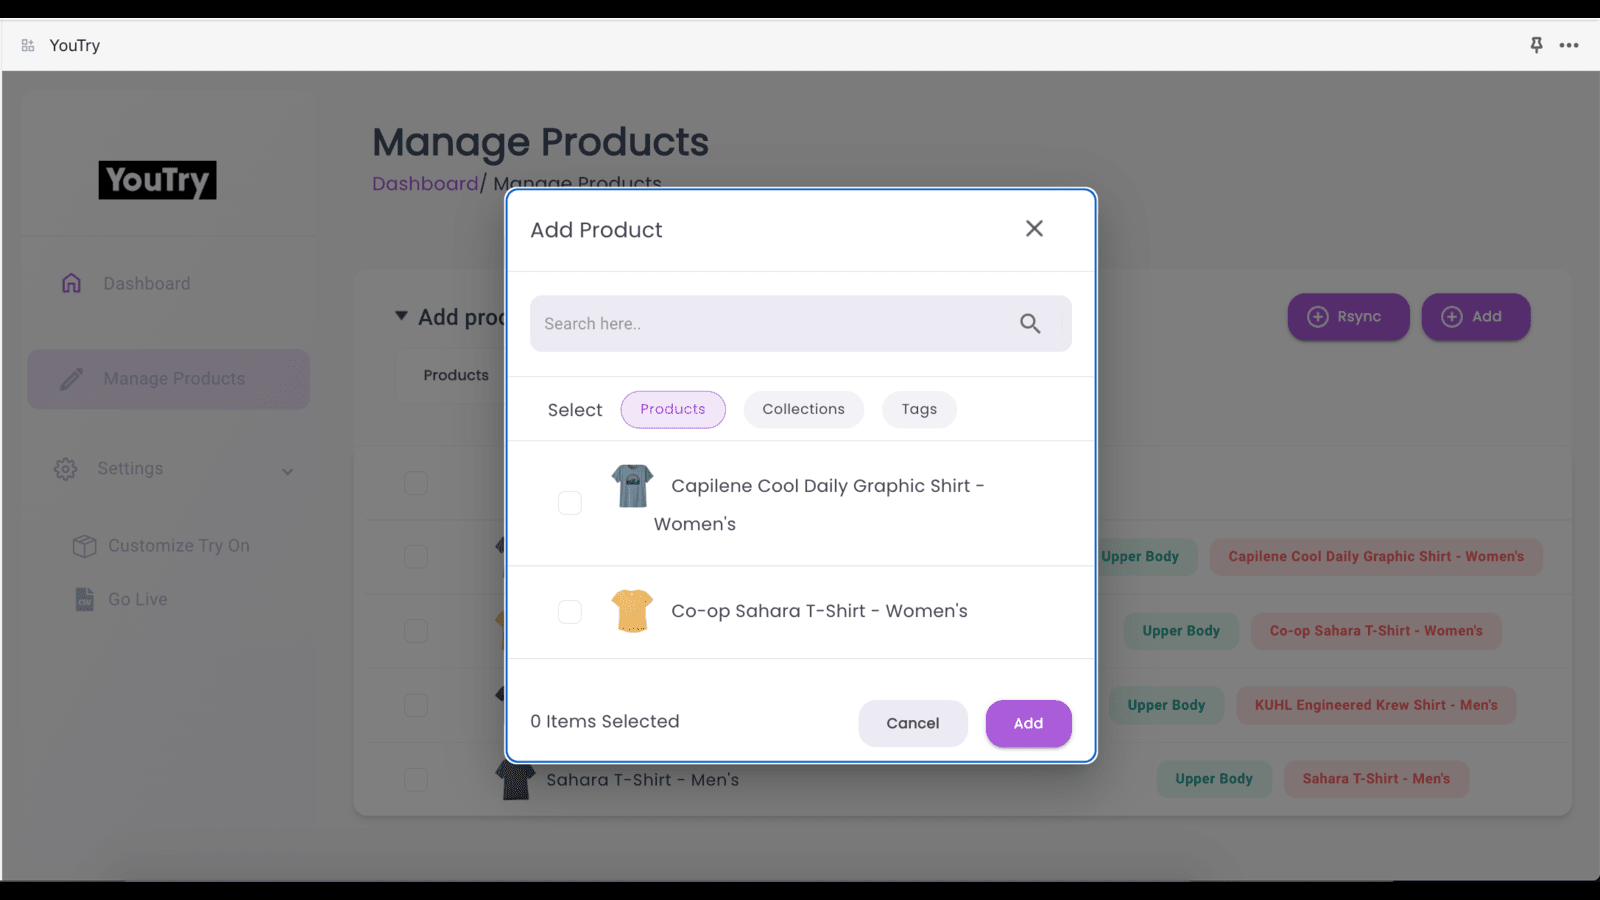 Enabling the try-on button for products, collections and tags